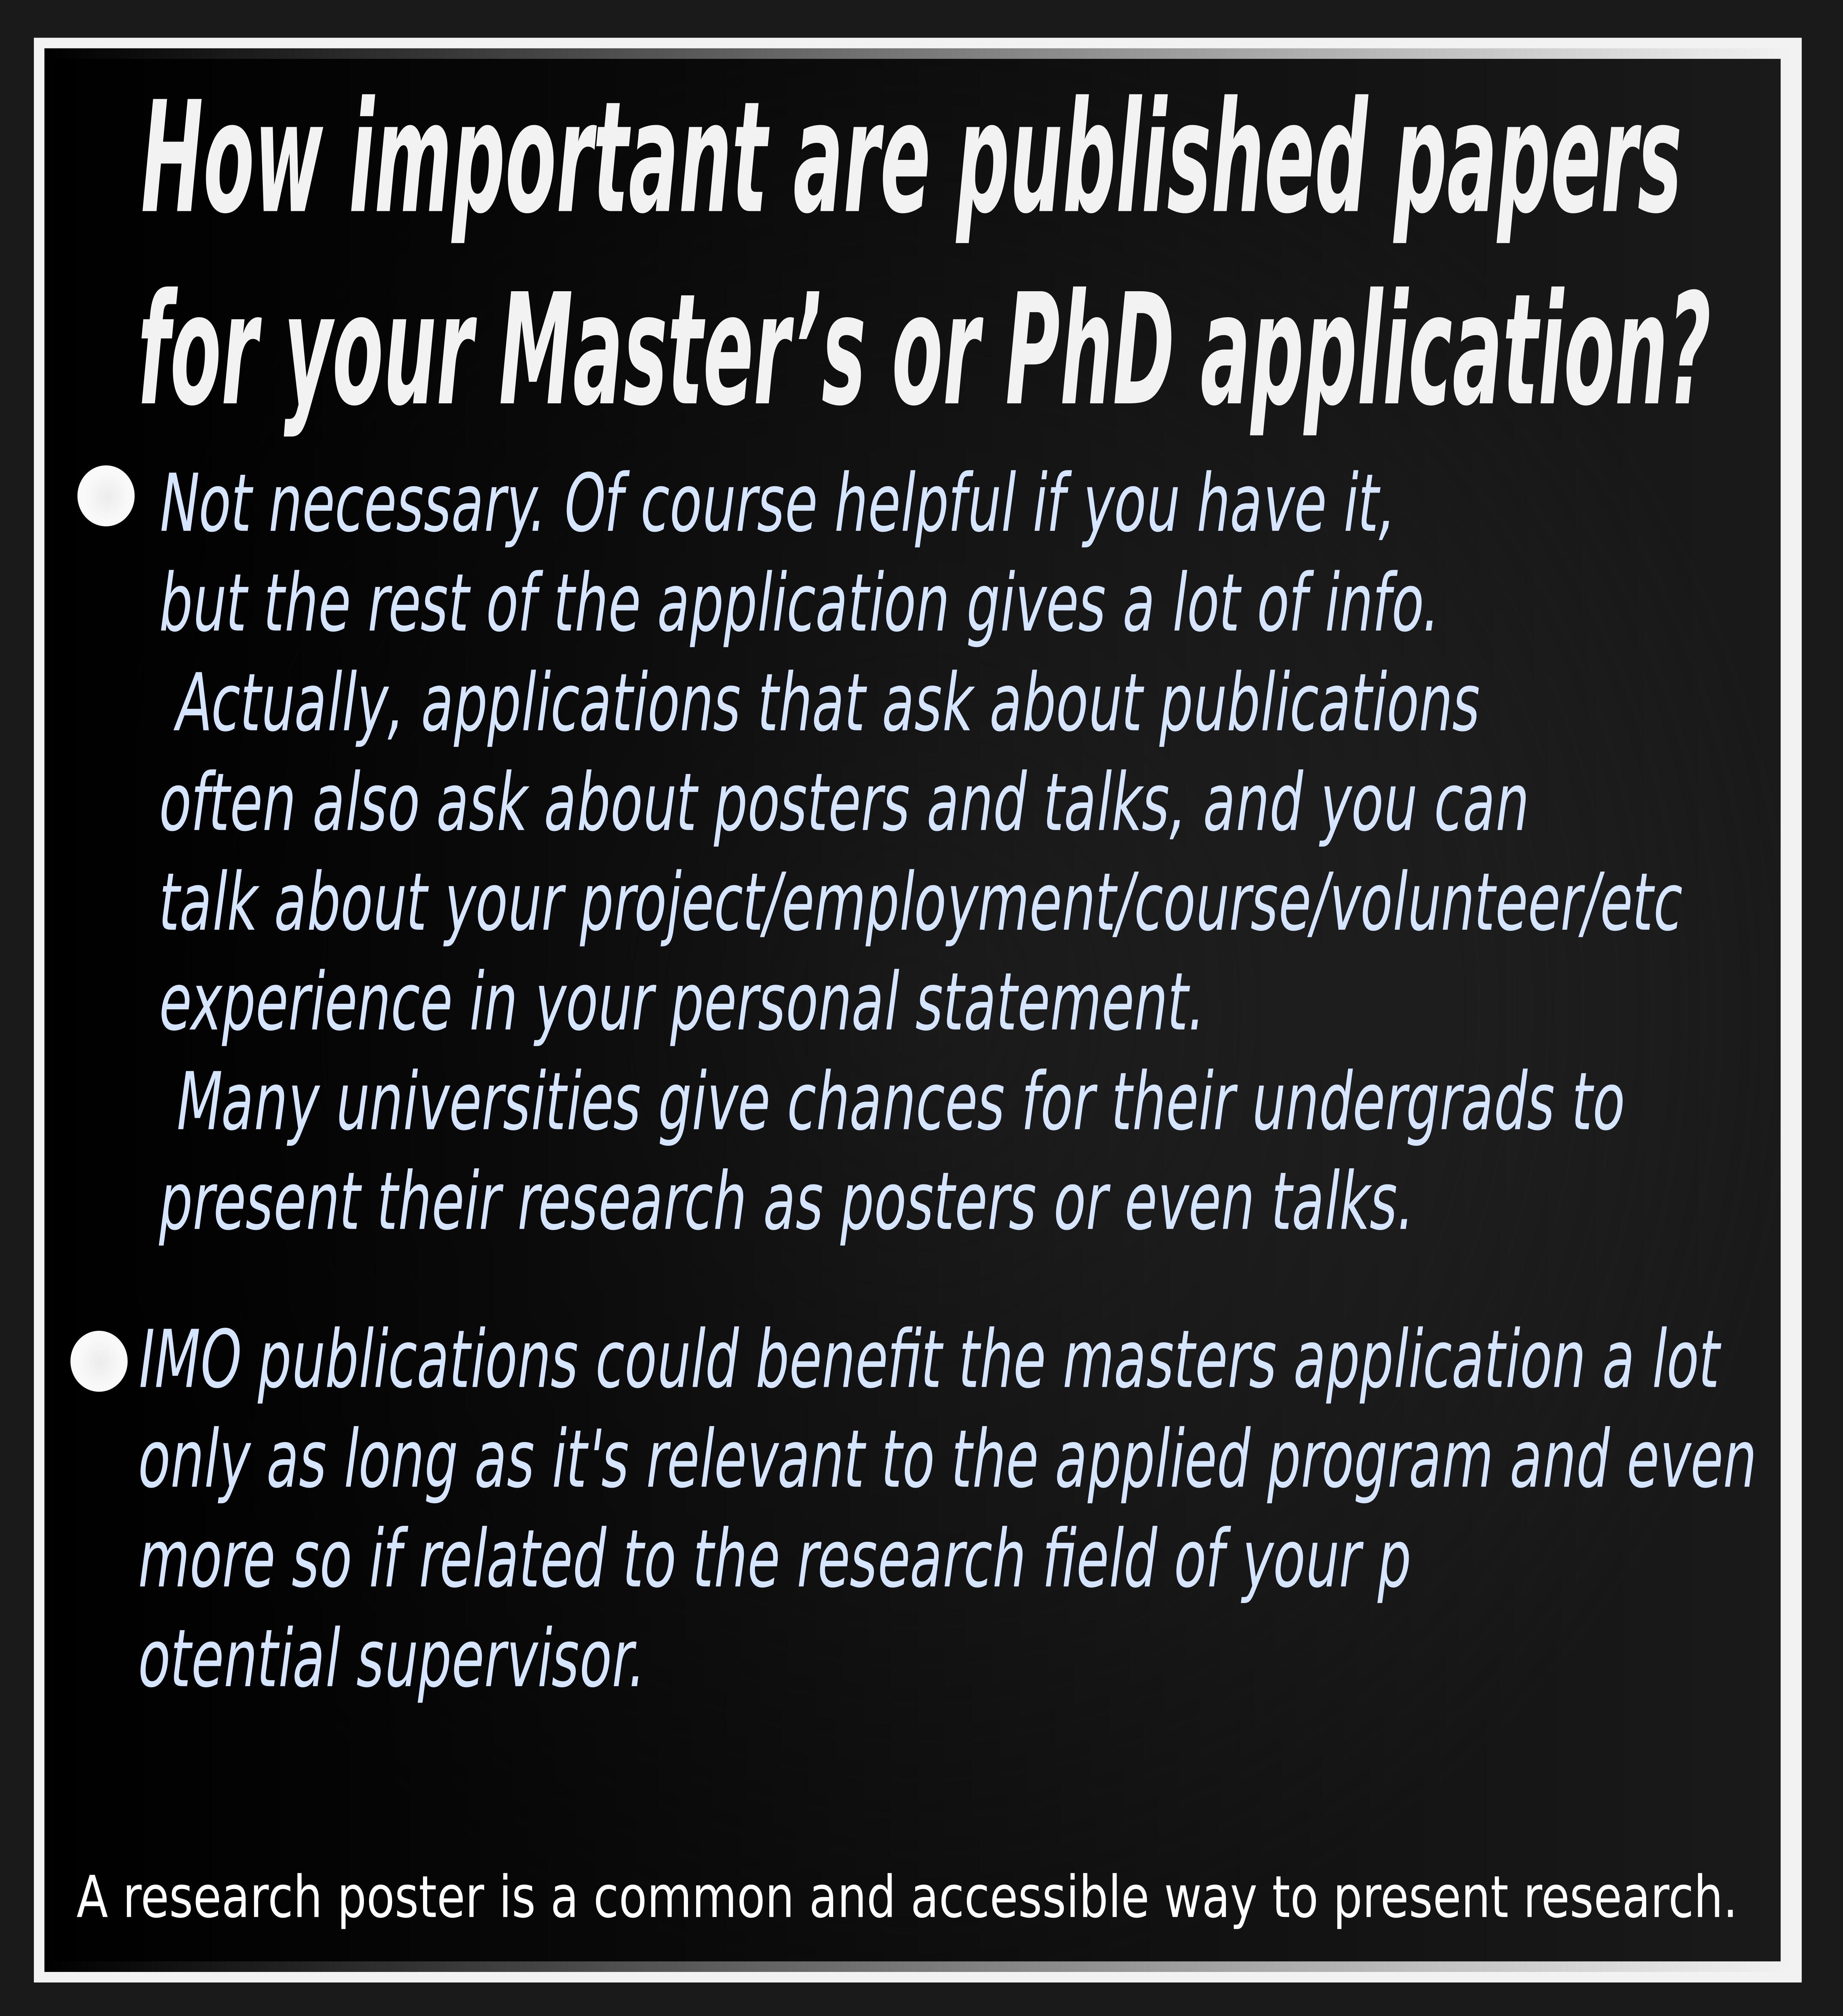 How important are published papers for your Master's or PhD application?